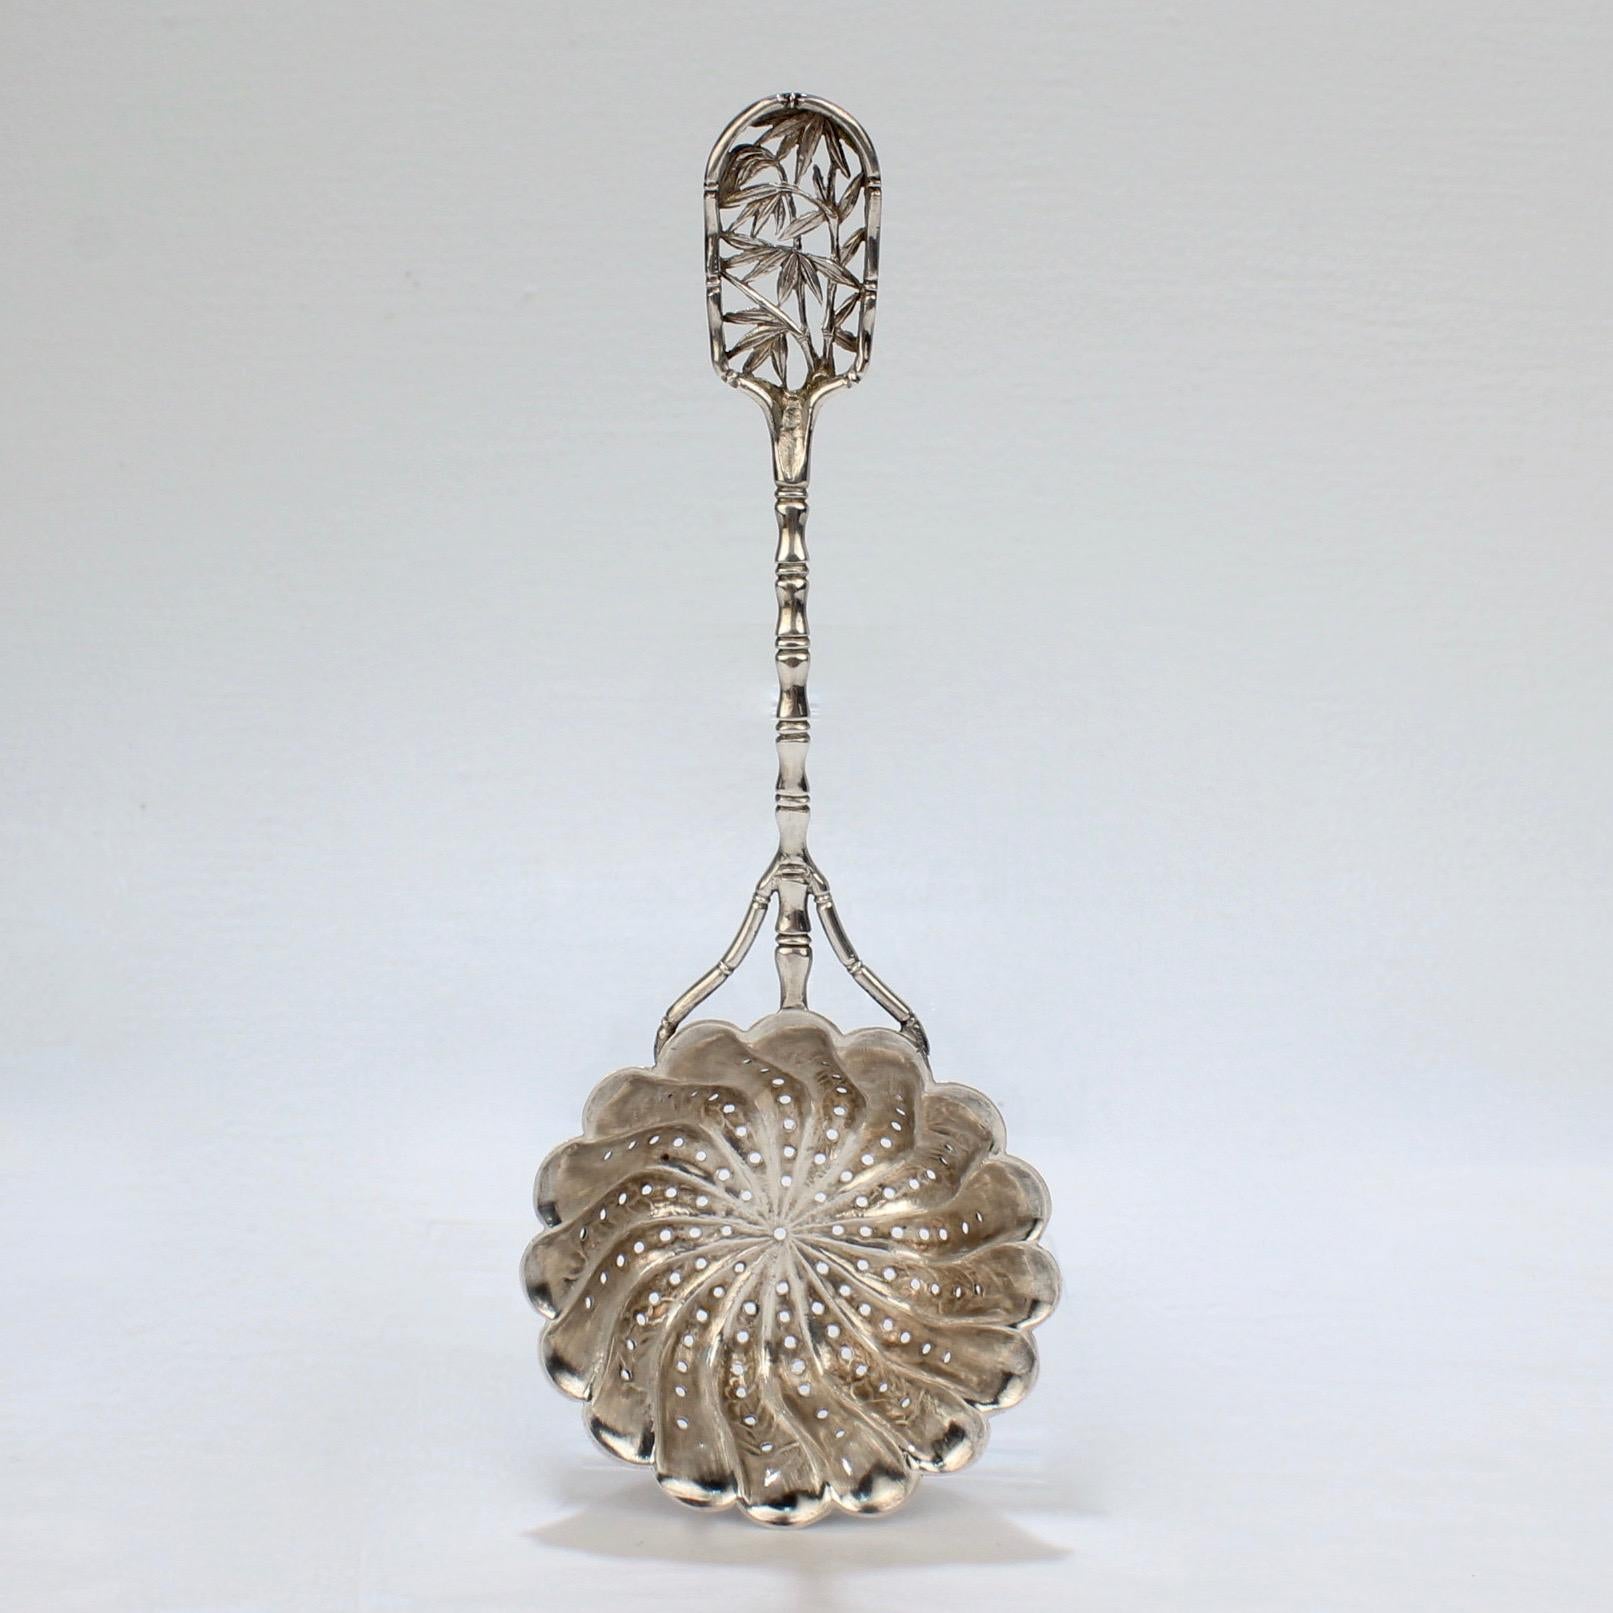 A fine and scarce Chinese Export silver tea strainer.

With fine bamboo leaf openwork to the handle.

Marked to the reverse with Chinese character marks and HC for Hung Chong & Co. of Shanghai and Canton. 

Length: ca. 6 3/4 in.

Items purchased